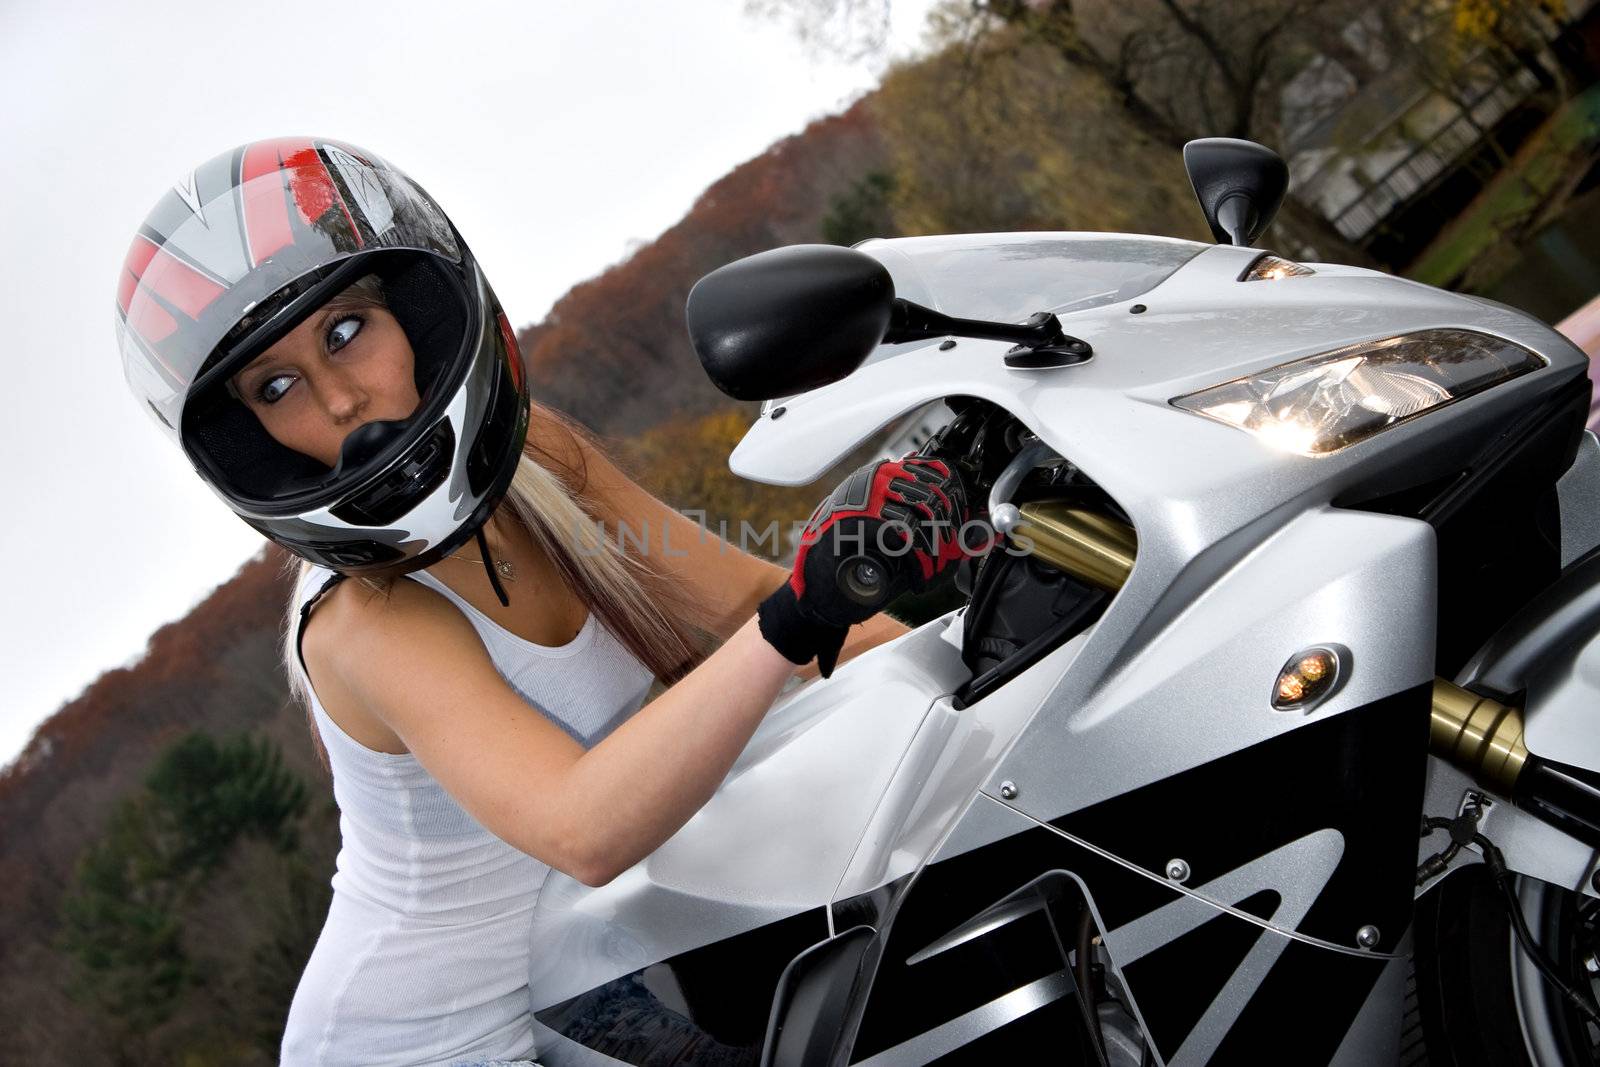 A pretty blonde girl seated on a modern motorcycle.